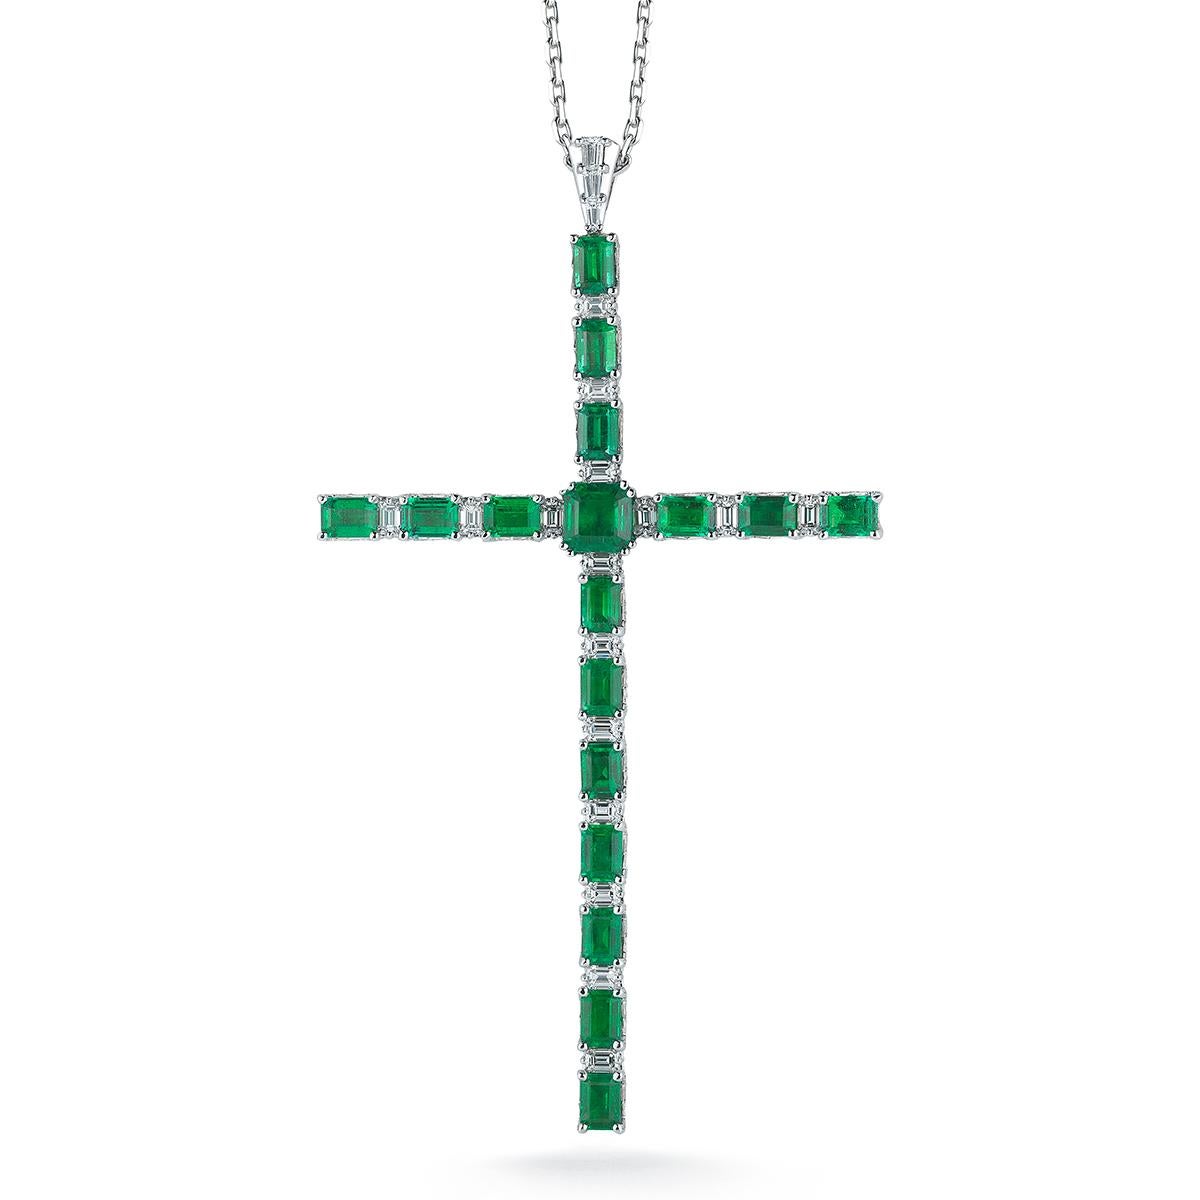 EMERALD CROSS PENDANT
A dramatic Emerald statement for an iconic symbol.
Item:	# 01898
Metal:	18k W
Lab:	C.dunaigre
Color Weight:	14.67 ct.
Diamond Weight:	5.59 ct.